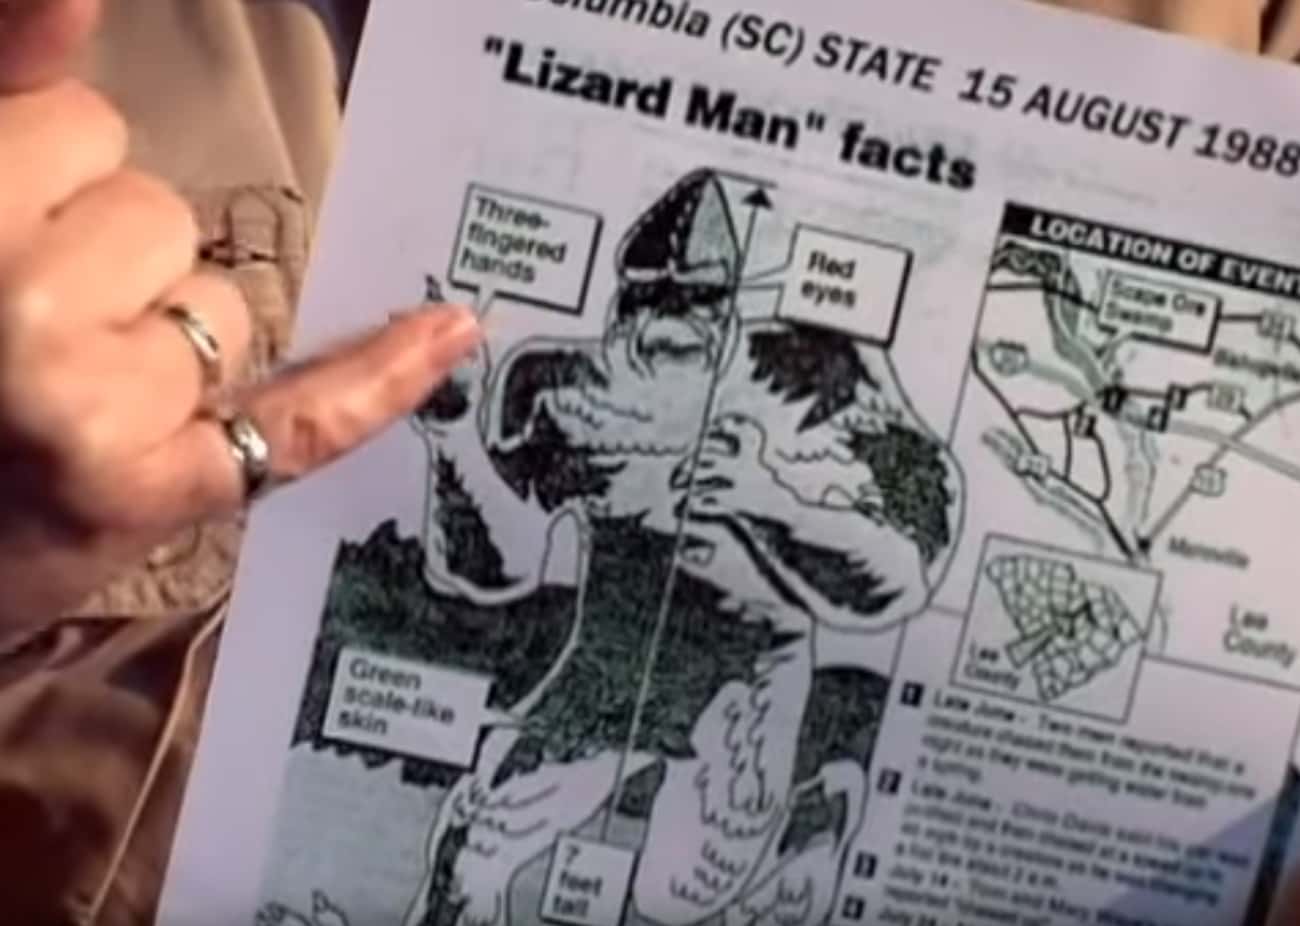 The Lizard Man Is Supposedly Seven Feet Tall With Green Scales, Black Claws, And Red Eyes